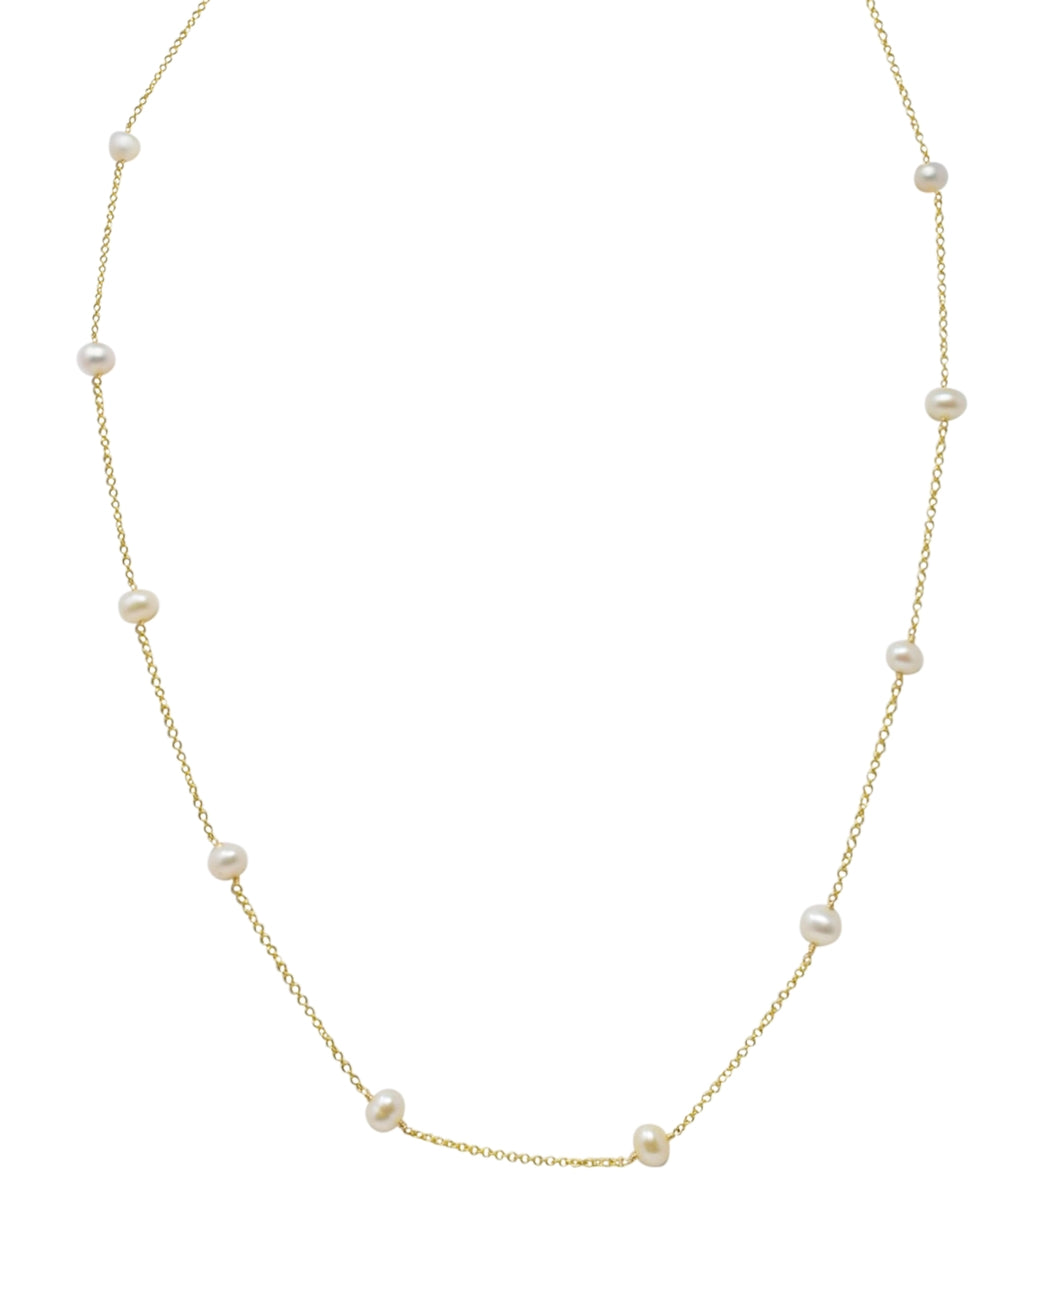 Tin cup style necklace, 14k gold filled with lustrous freshwater pearls, handmade in USA